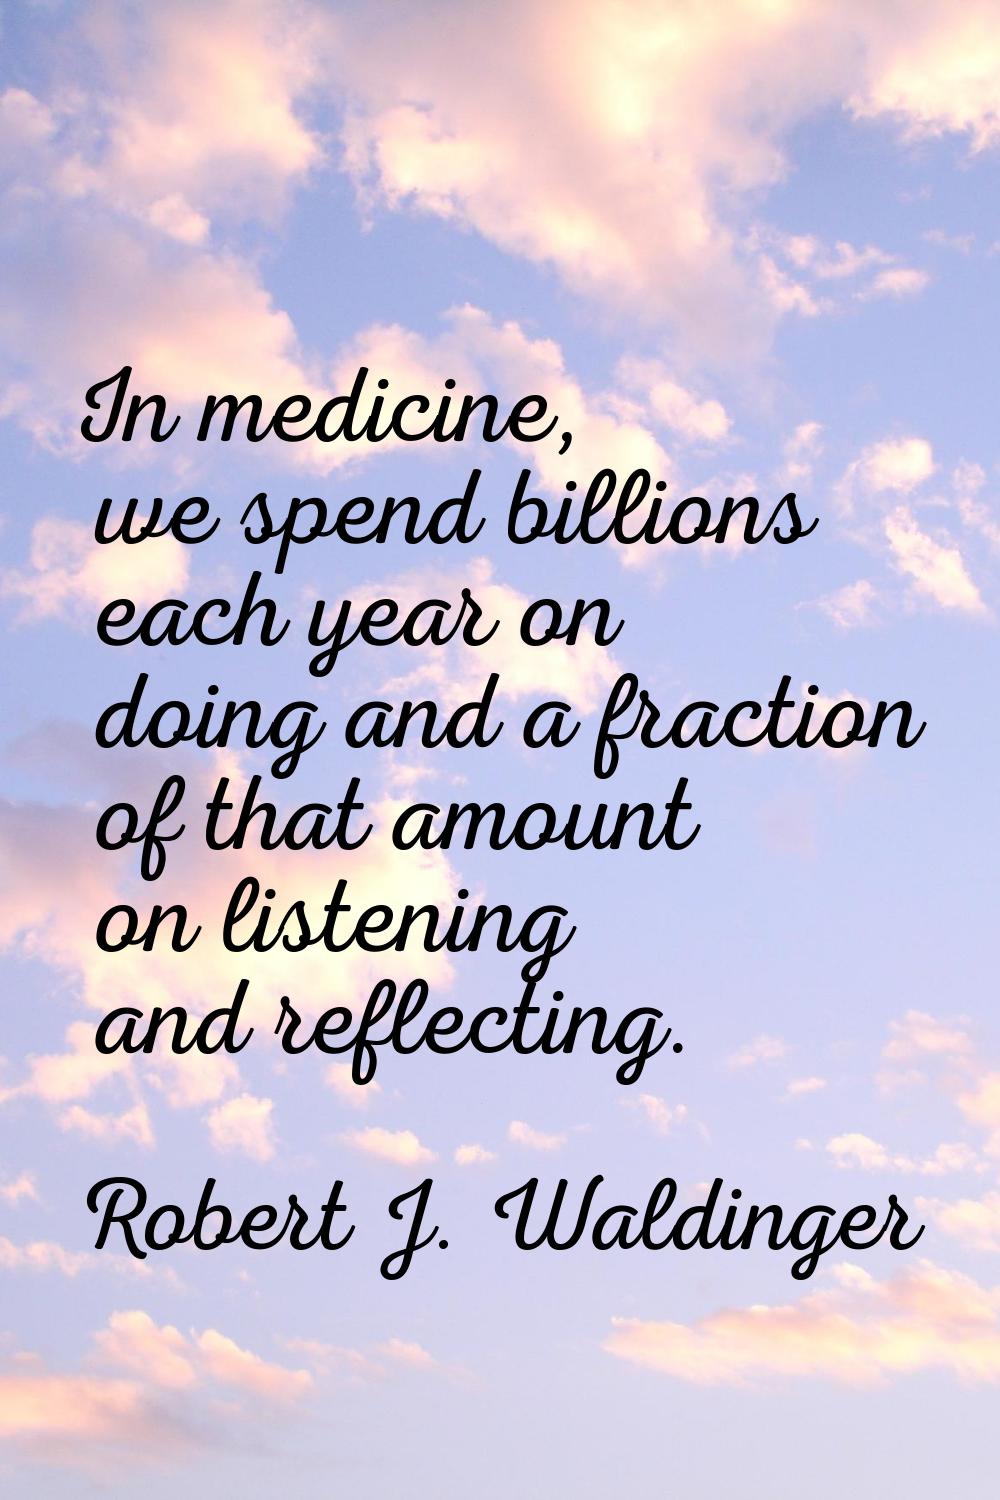 In medicine, we spend billions each year on doing and a fraction of that amount on listening and re